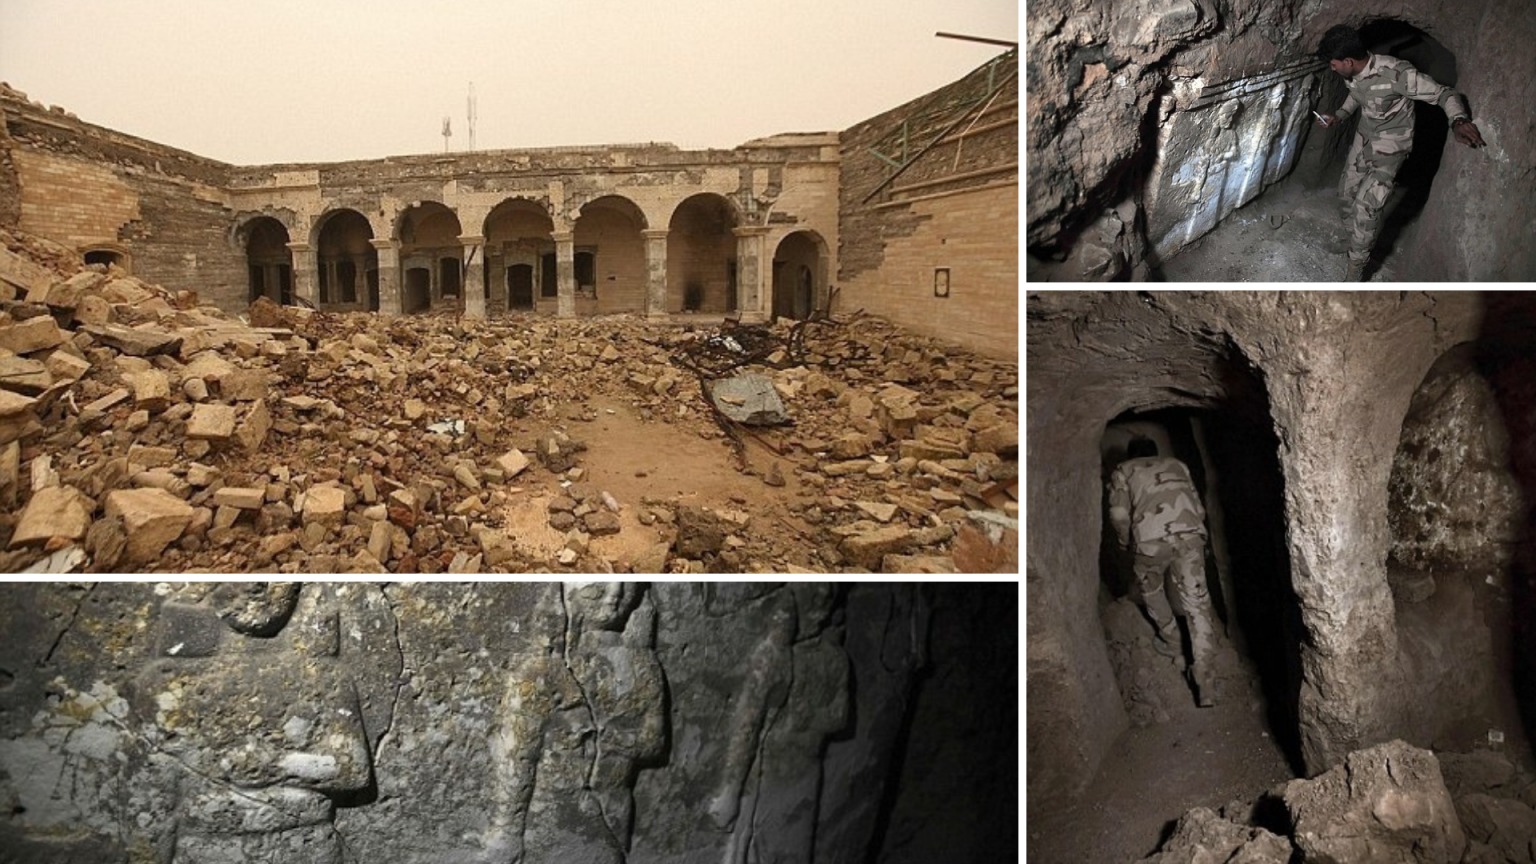 The 2,600-Year-old palace is found buried under the ruins of a shrine blown up by Isis in Mosul